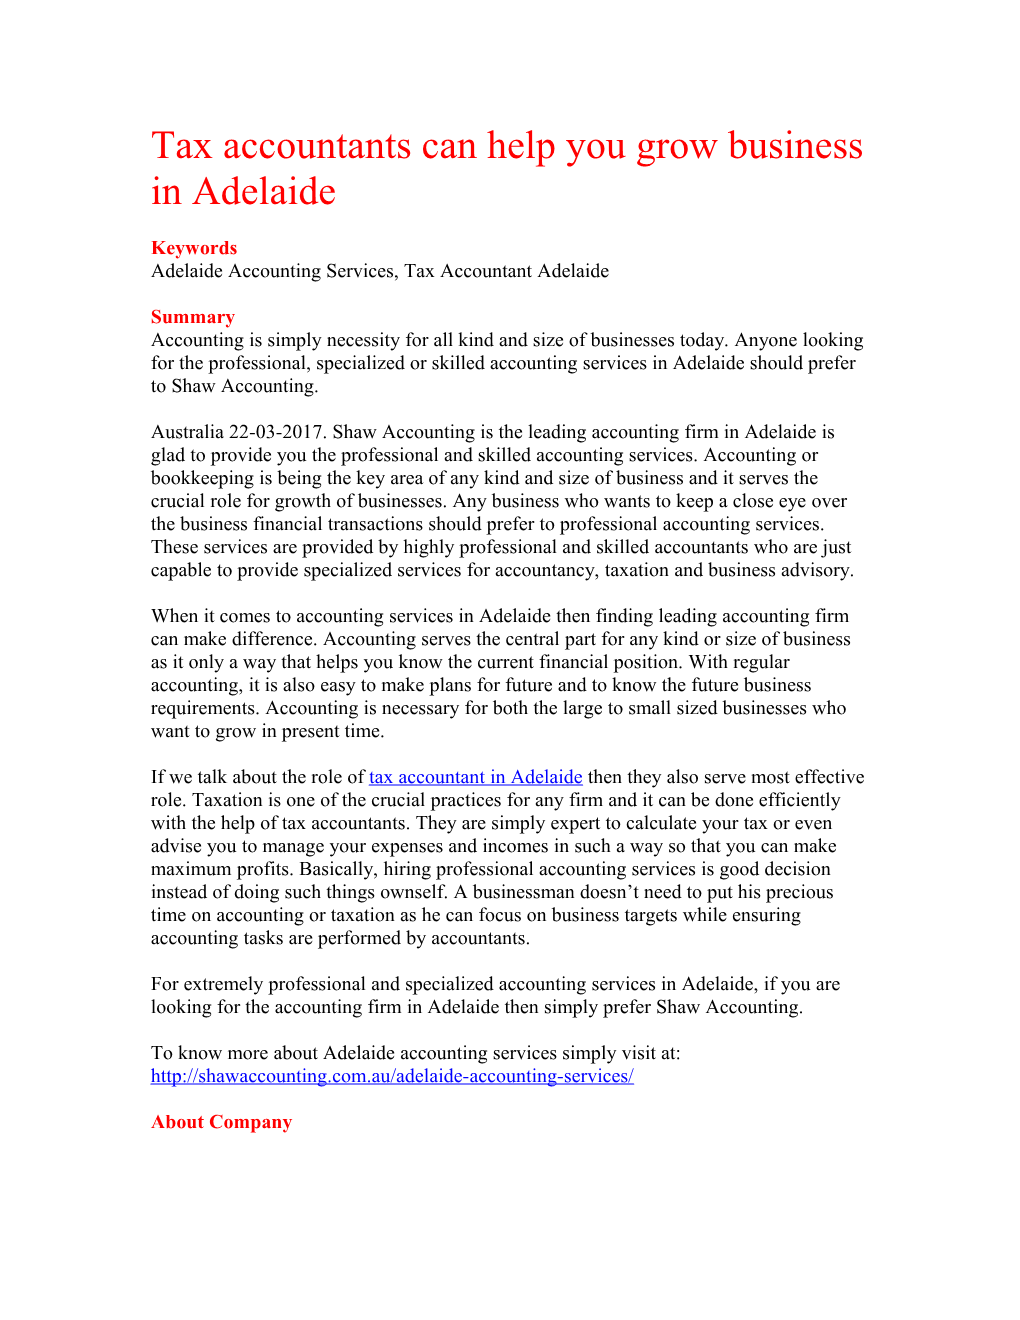 Tax Accountants Can Help You Grow Business in Adelaide